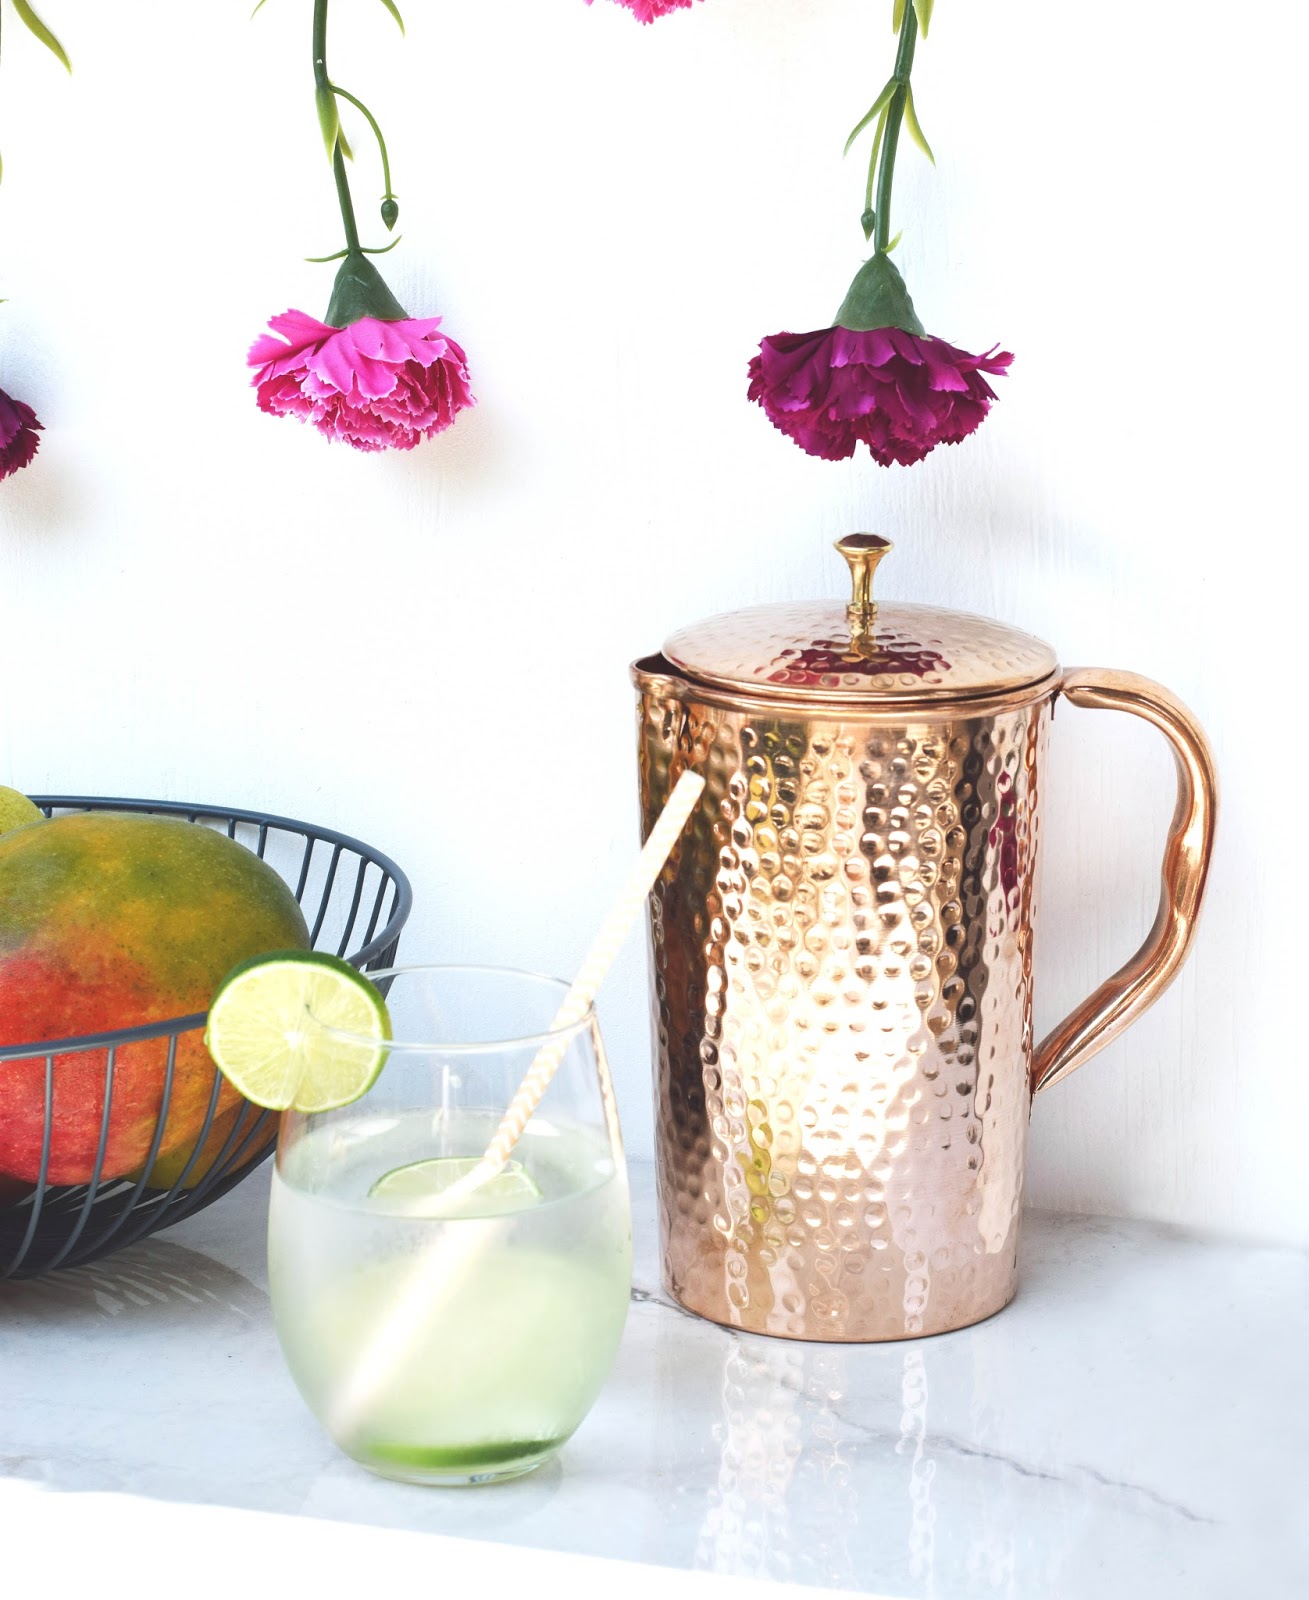 Benefits of drinking water from a copper pitcher